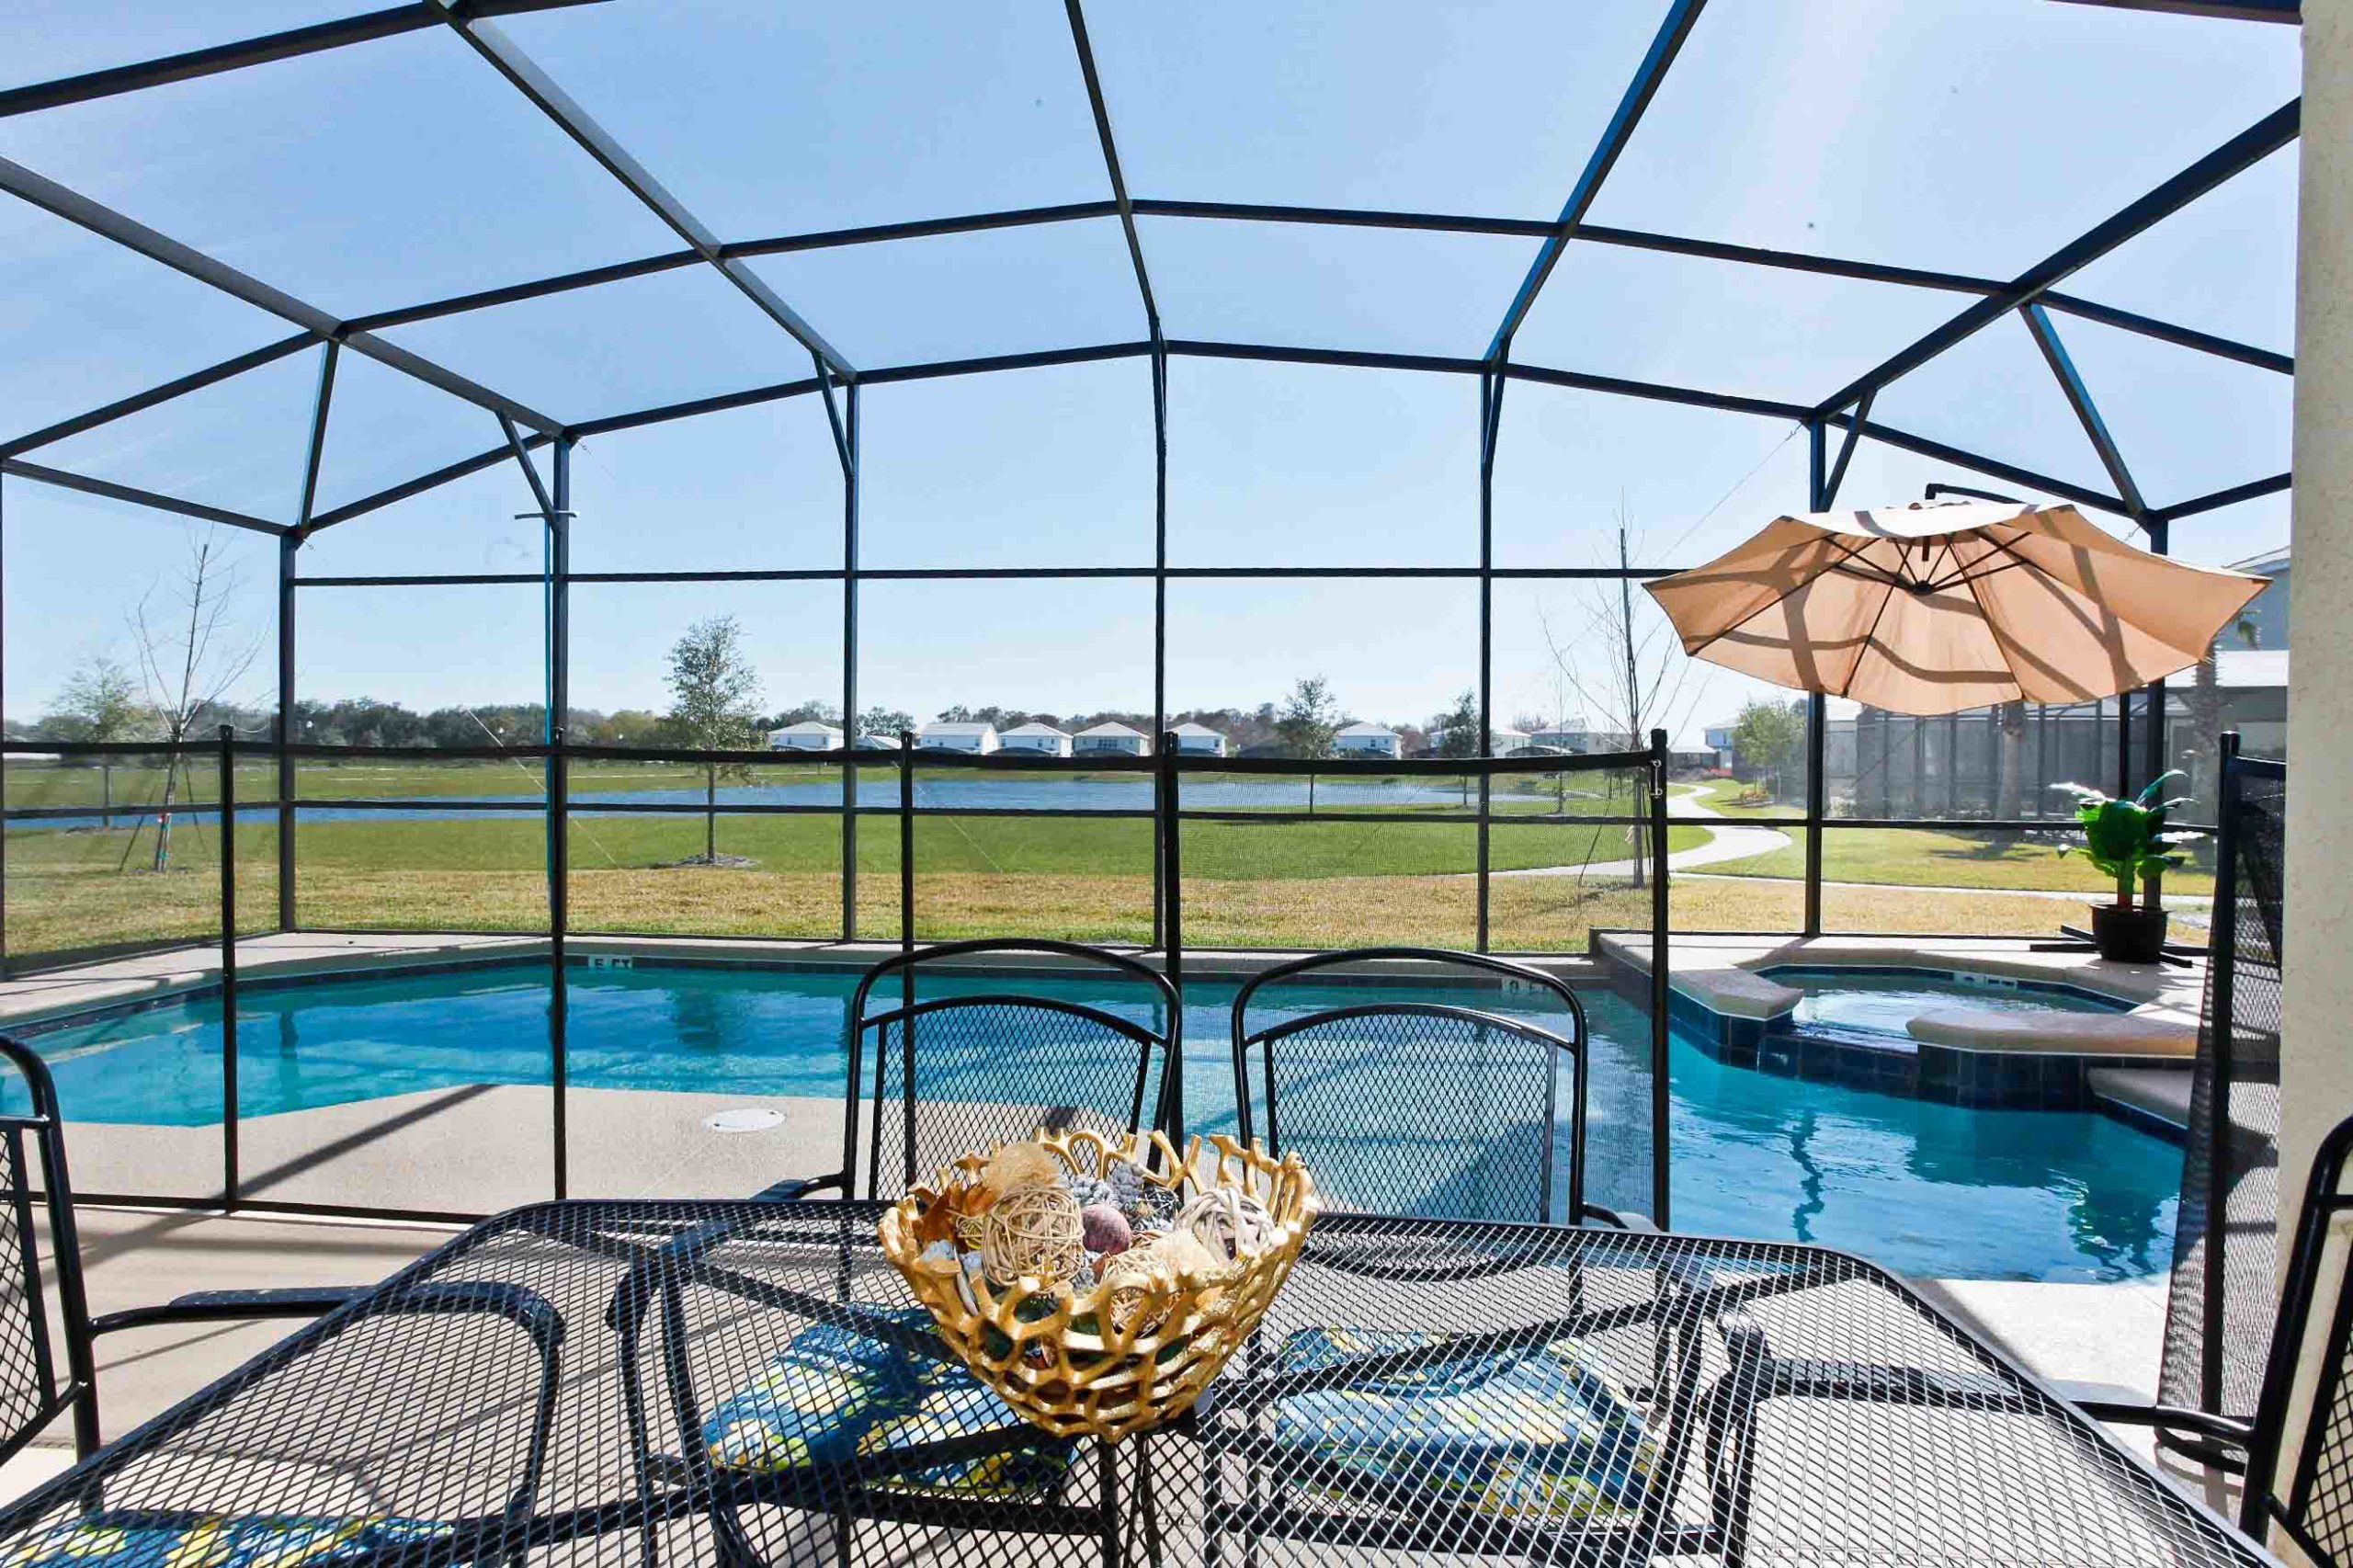 A luxury vacation home will offer you the ultimate experience of living in Orlando